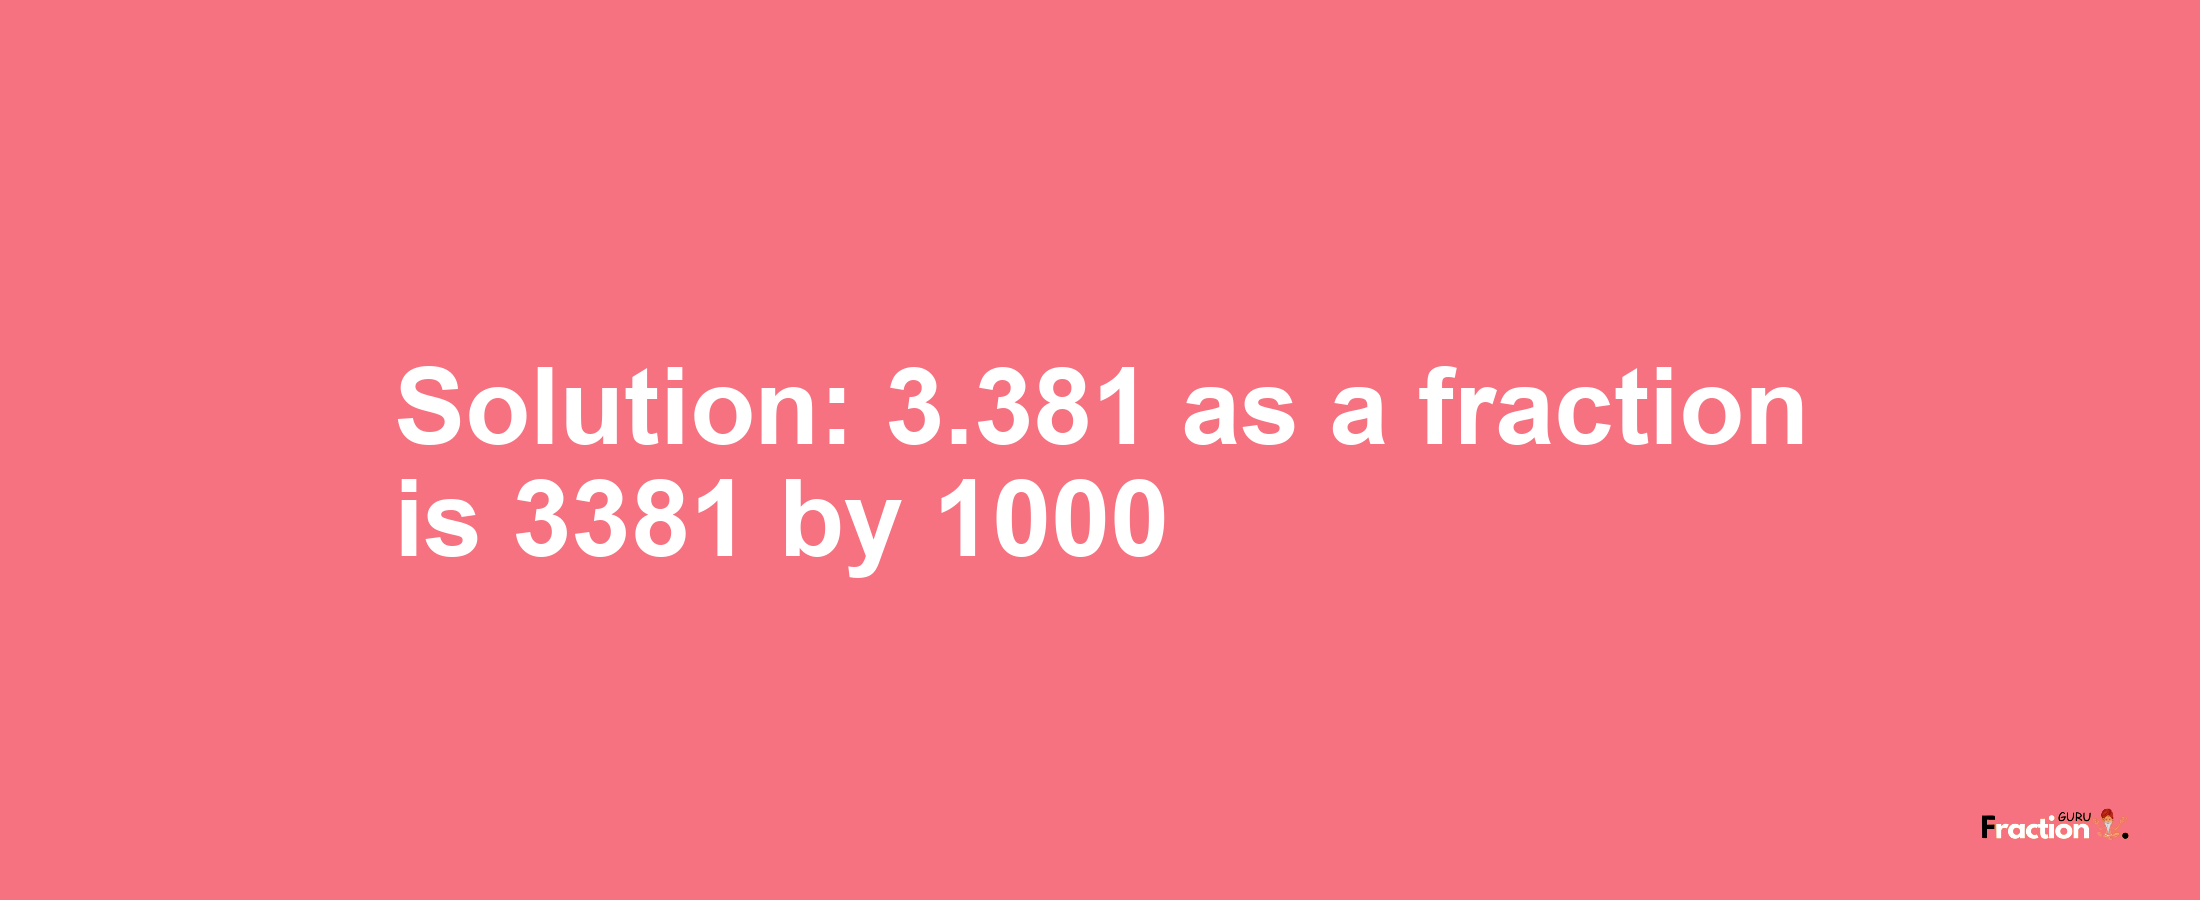 Solution:3.381 as a fraction is 3381/1000